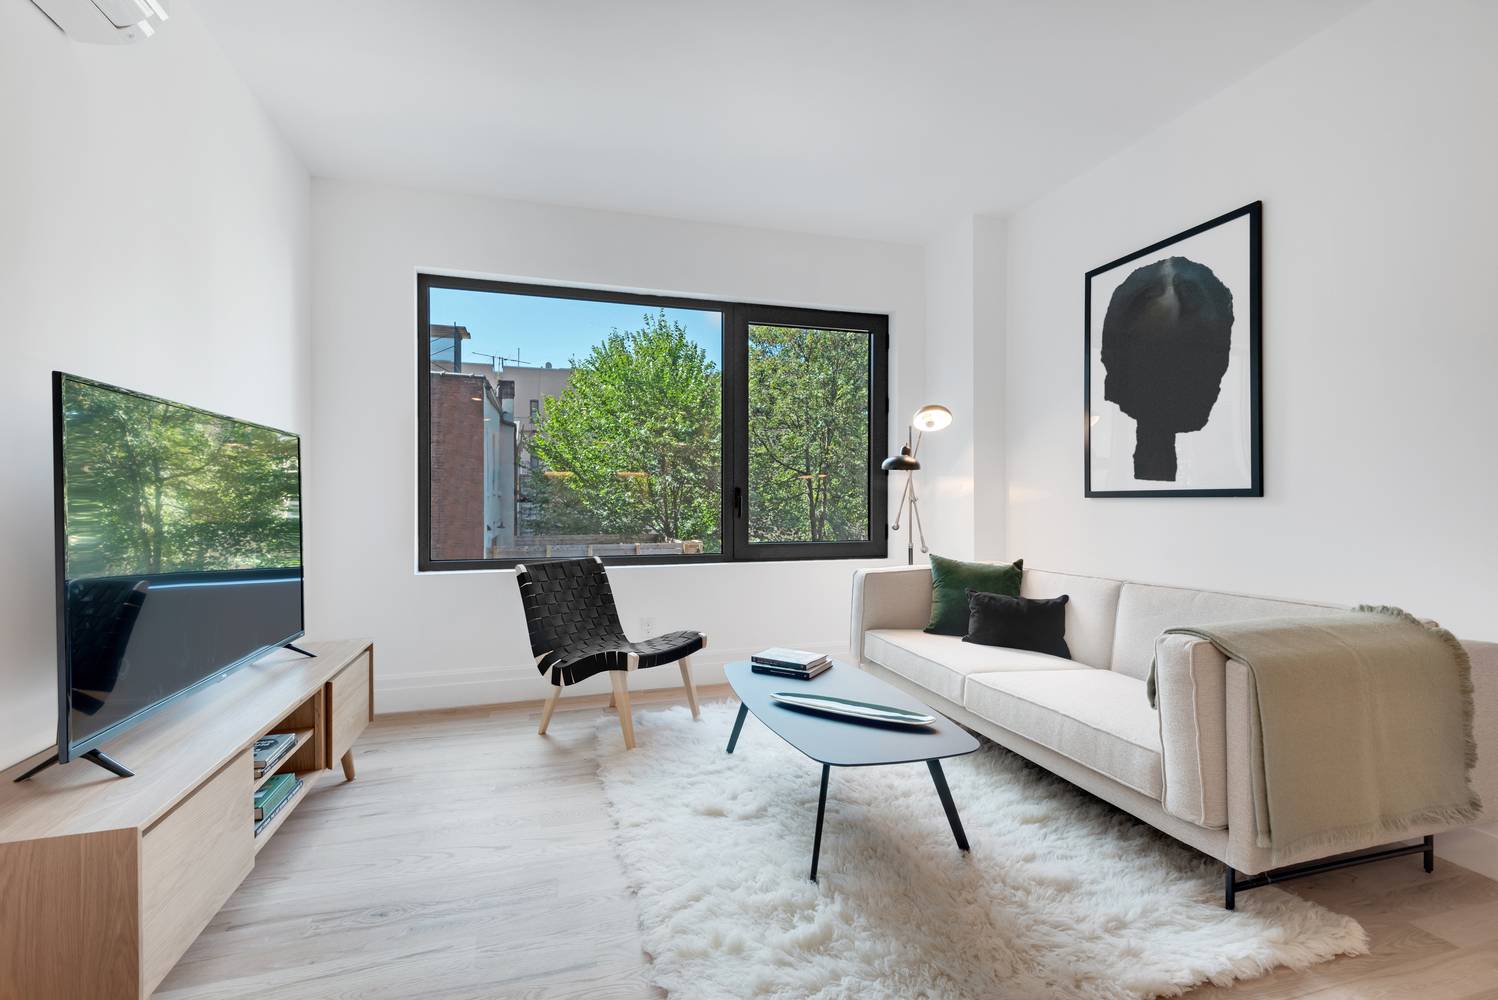 Located on a tree lined street among classic Brooklyn brownstones, this thoughtfully designed building is divided into three sections, each measuring the same width as the typical Brooklyn townhouse.